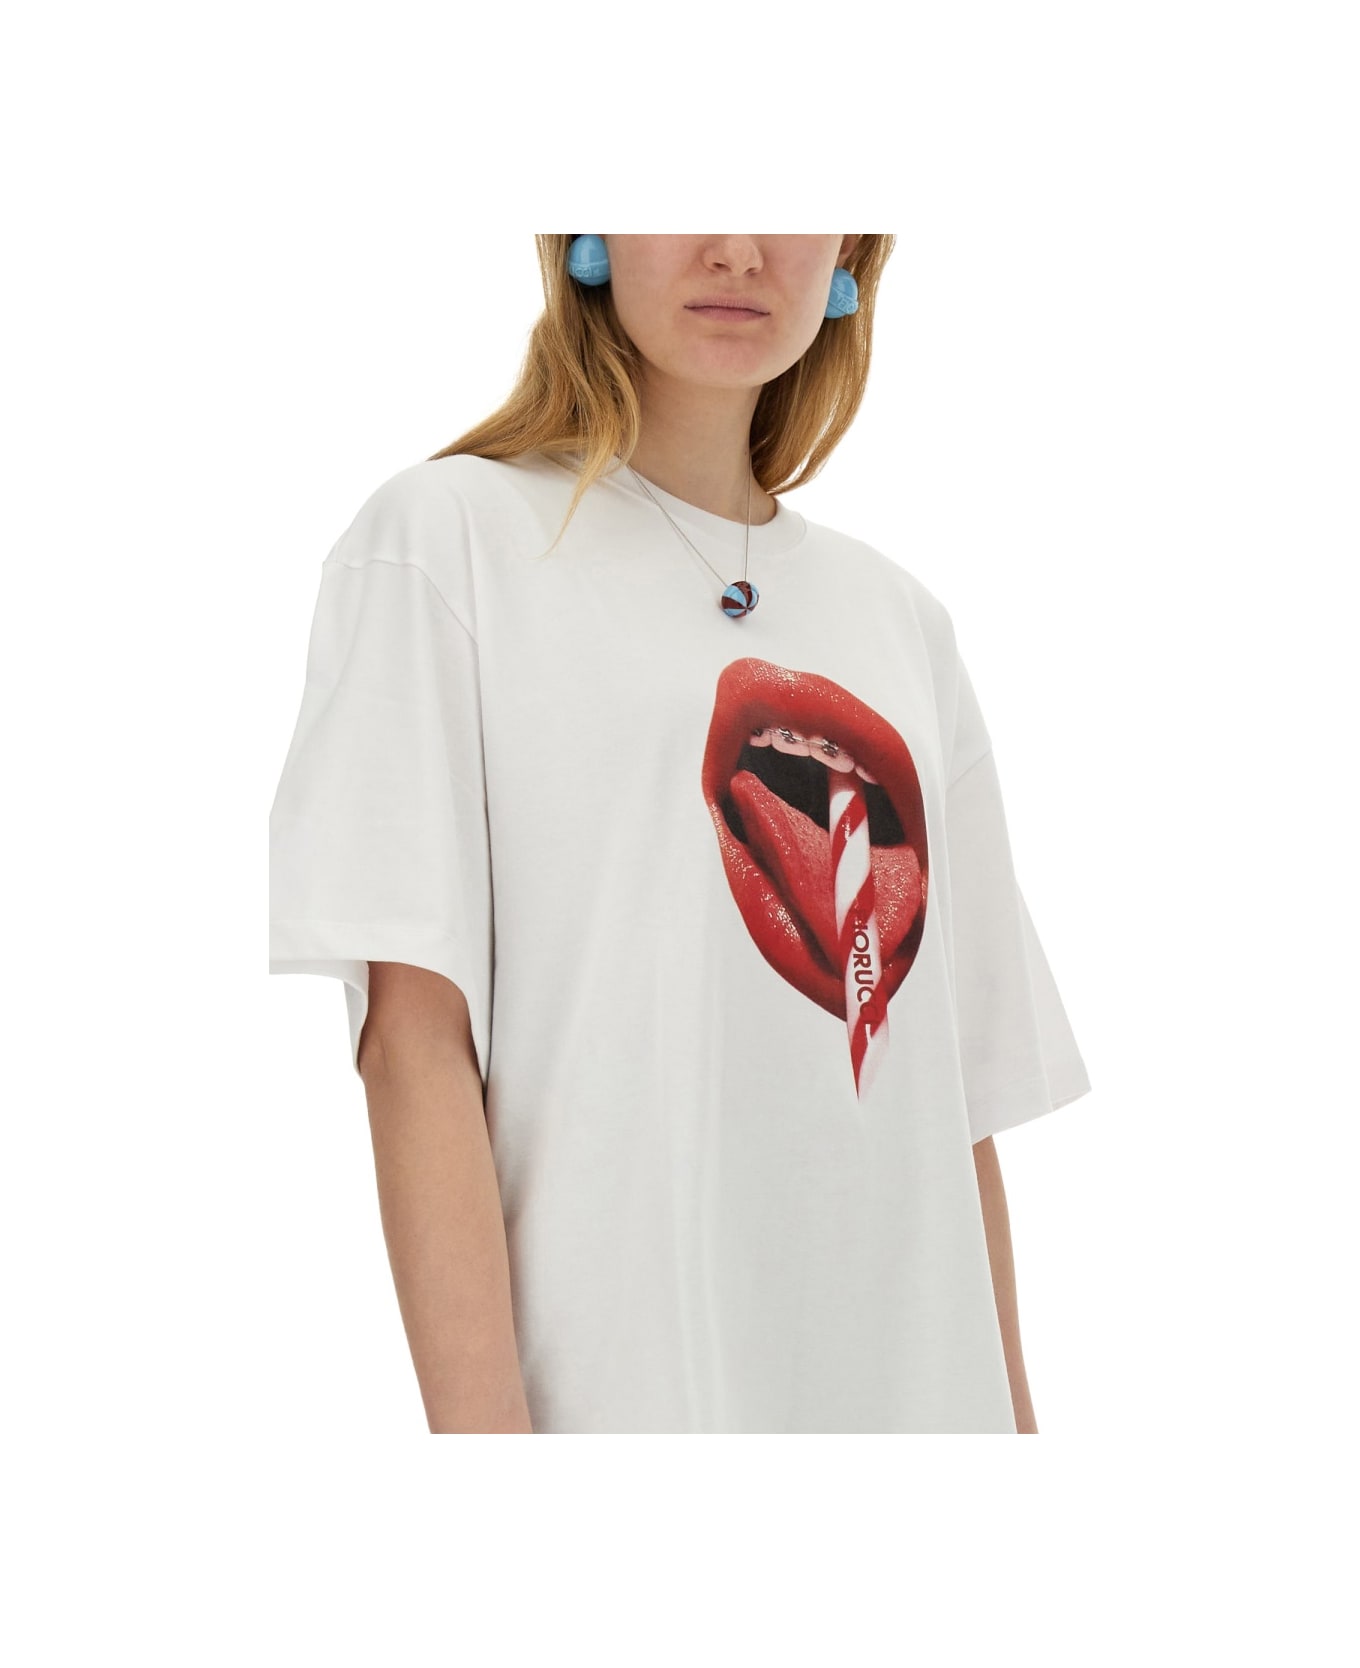 Fiorucci T-shirt With Mouth Print - WHITE